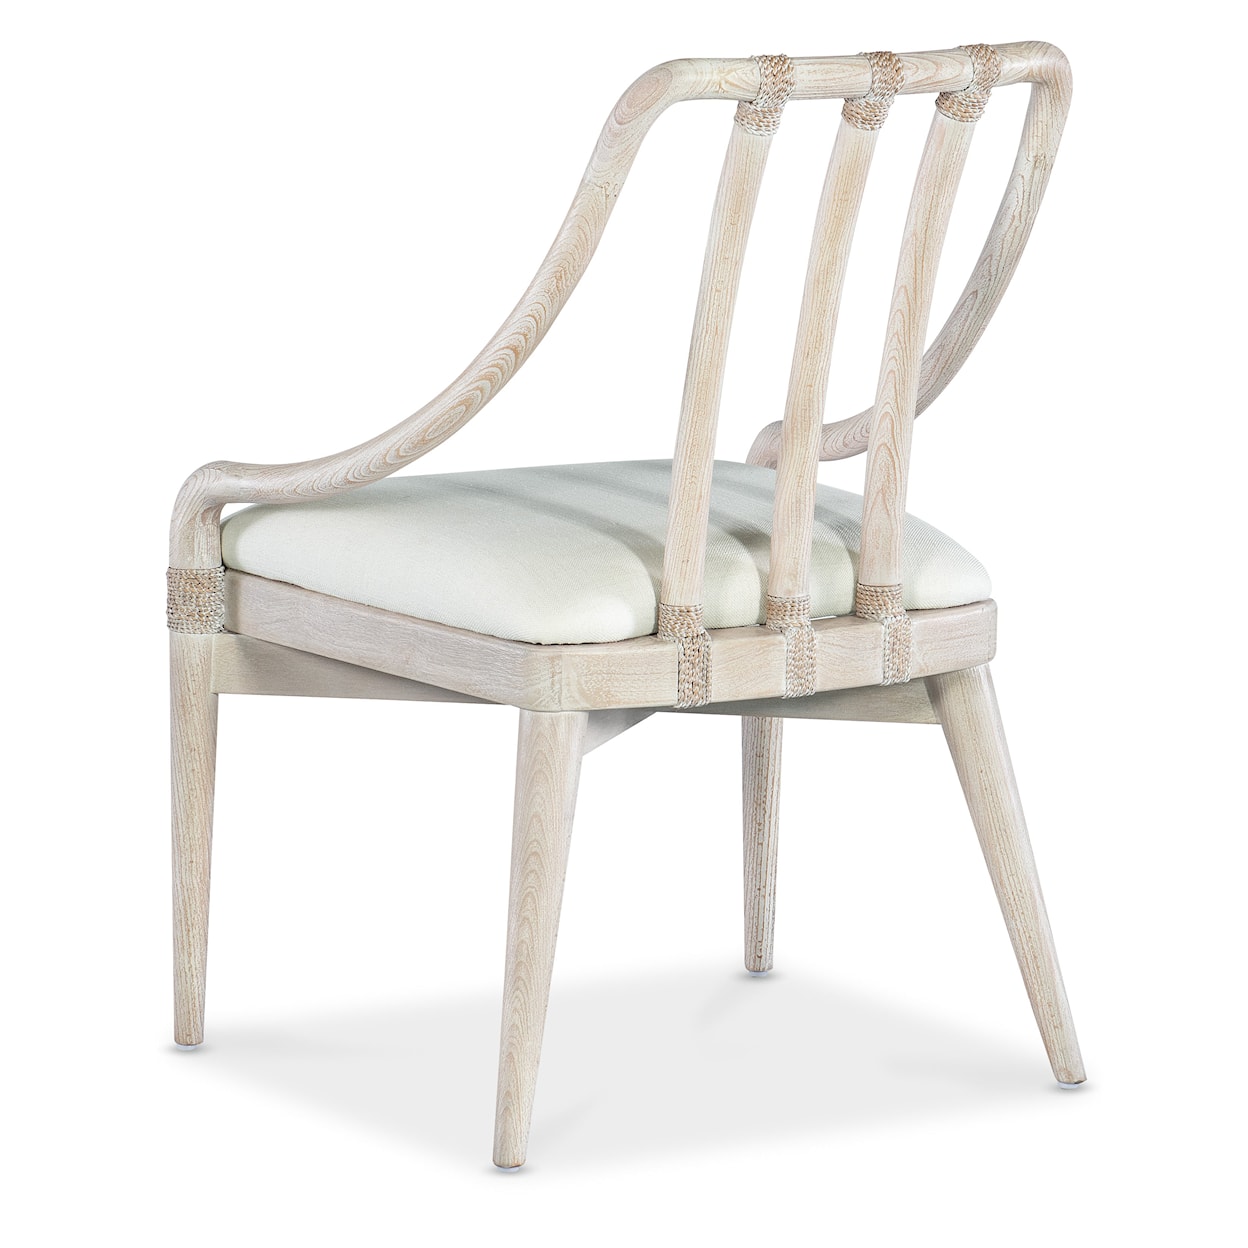 Hooker Furniture Commerce and Market Seaside Chair with Upholstered Seat (2/Cnt)